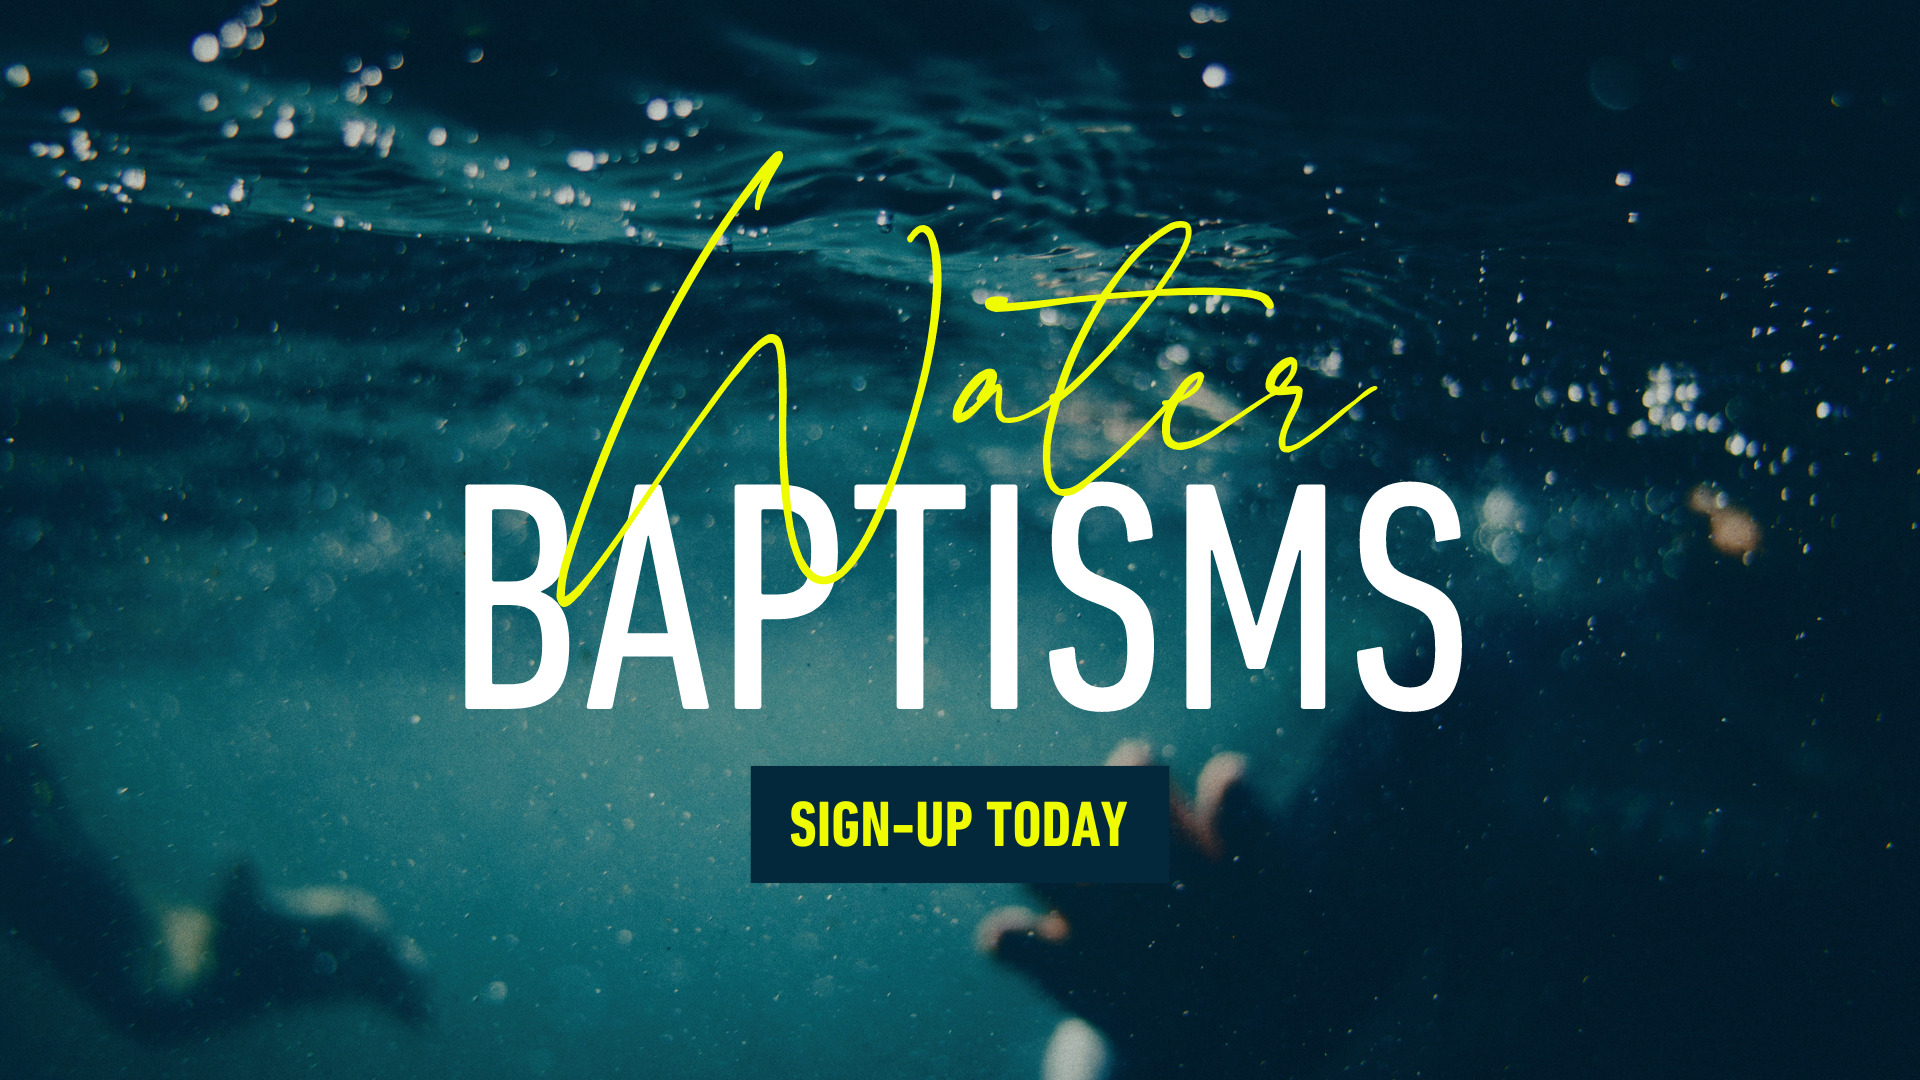 Water Baptism 4K 3840 × 2160 Px | Remix Church Media | Editable Design Templates And Resources Made For The Church.